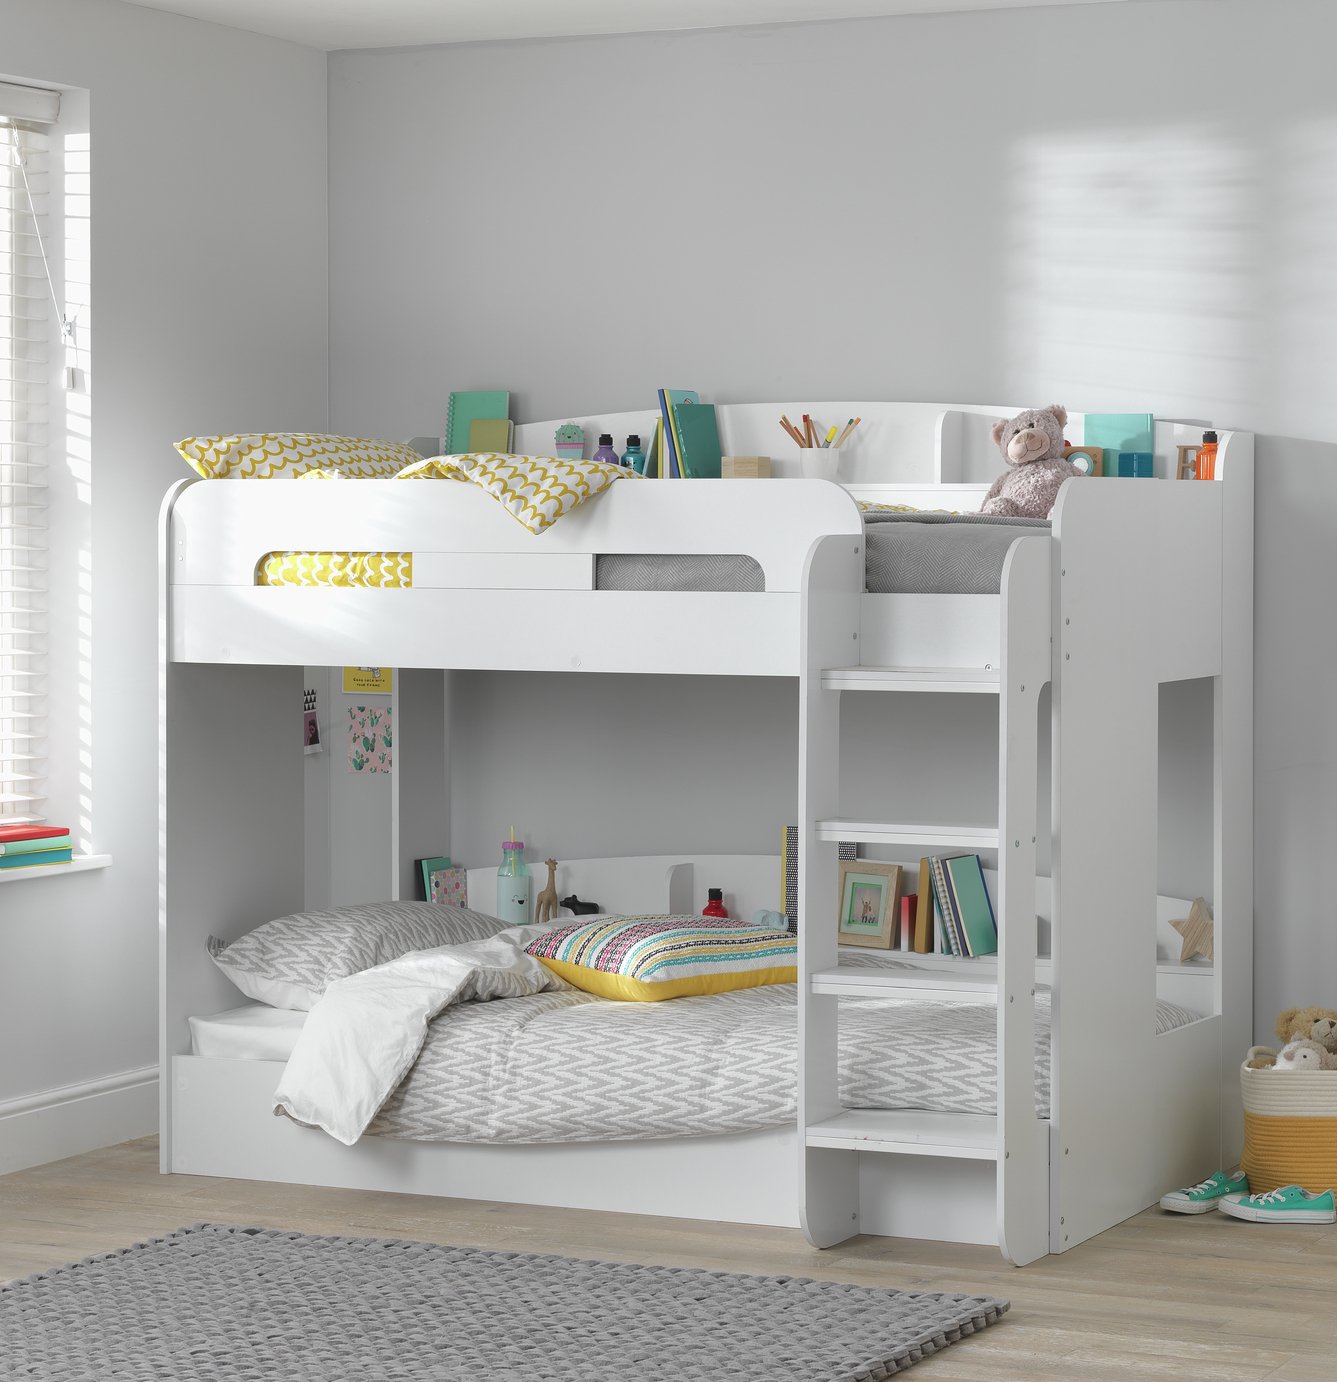 Argos Home Ultimate Bunk Bed and 2 Kids Mattresses - White